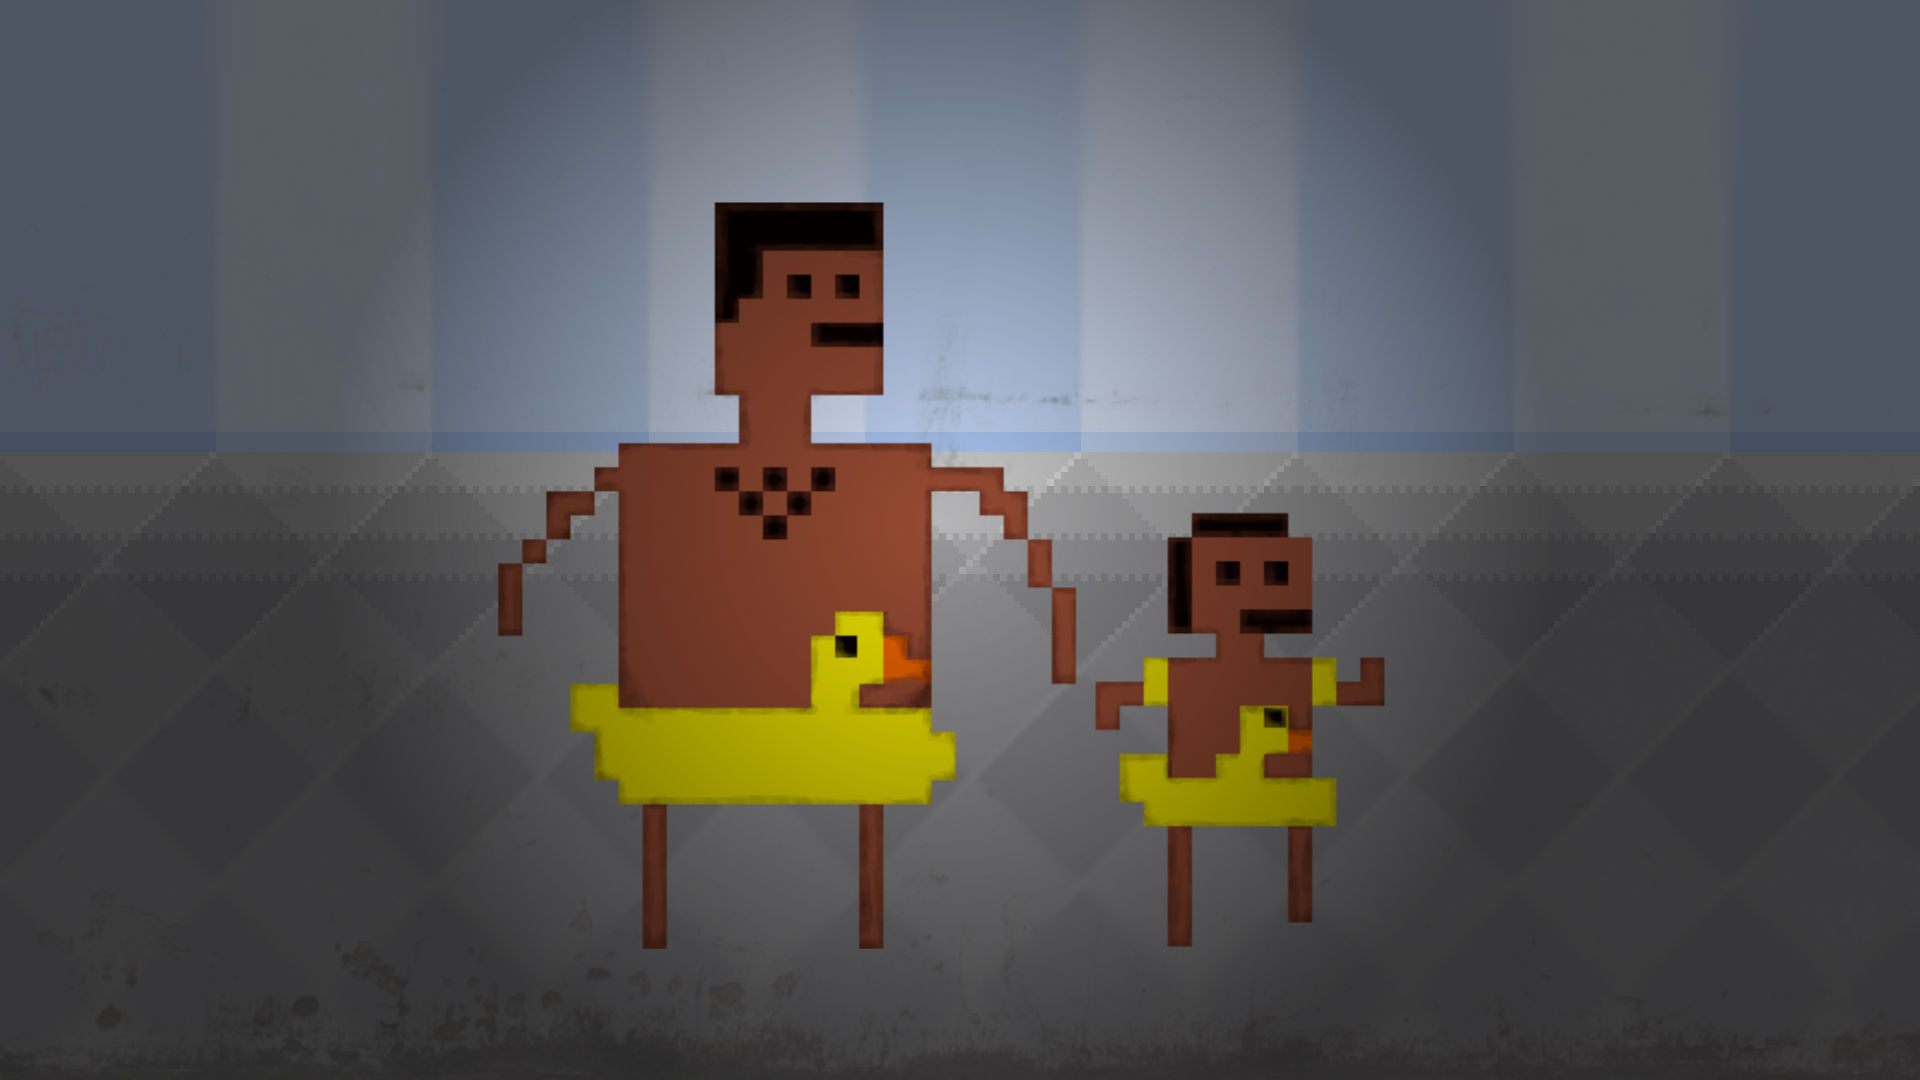 Shower dad. Shower with your dad Simulator 2015. Симулятор душа с отцом. Shower with your dad. Shower with your dad Simulator 2015: do you still Shower with your dad заставка игра.